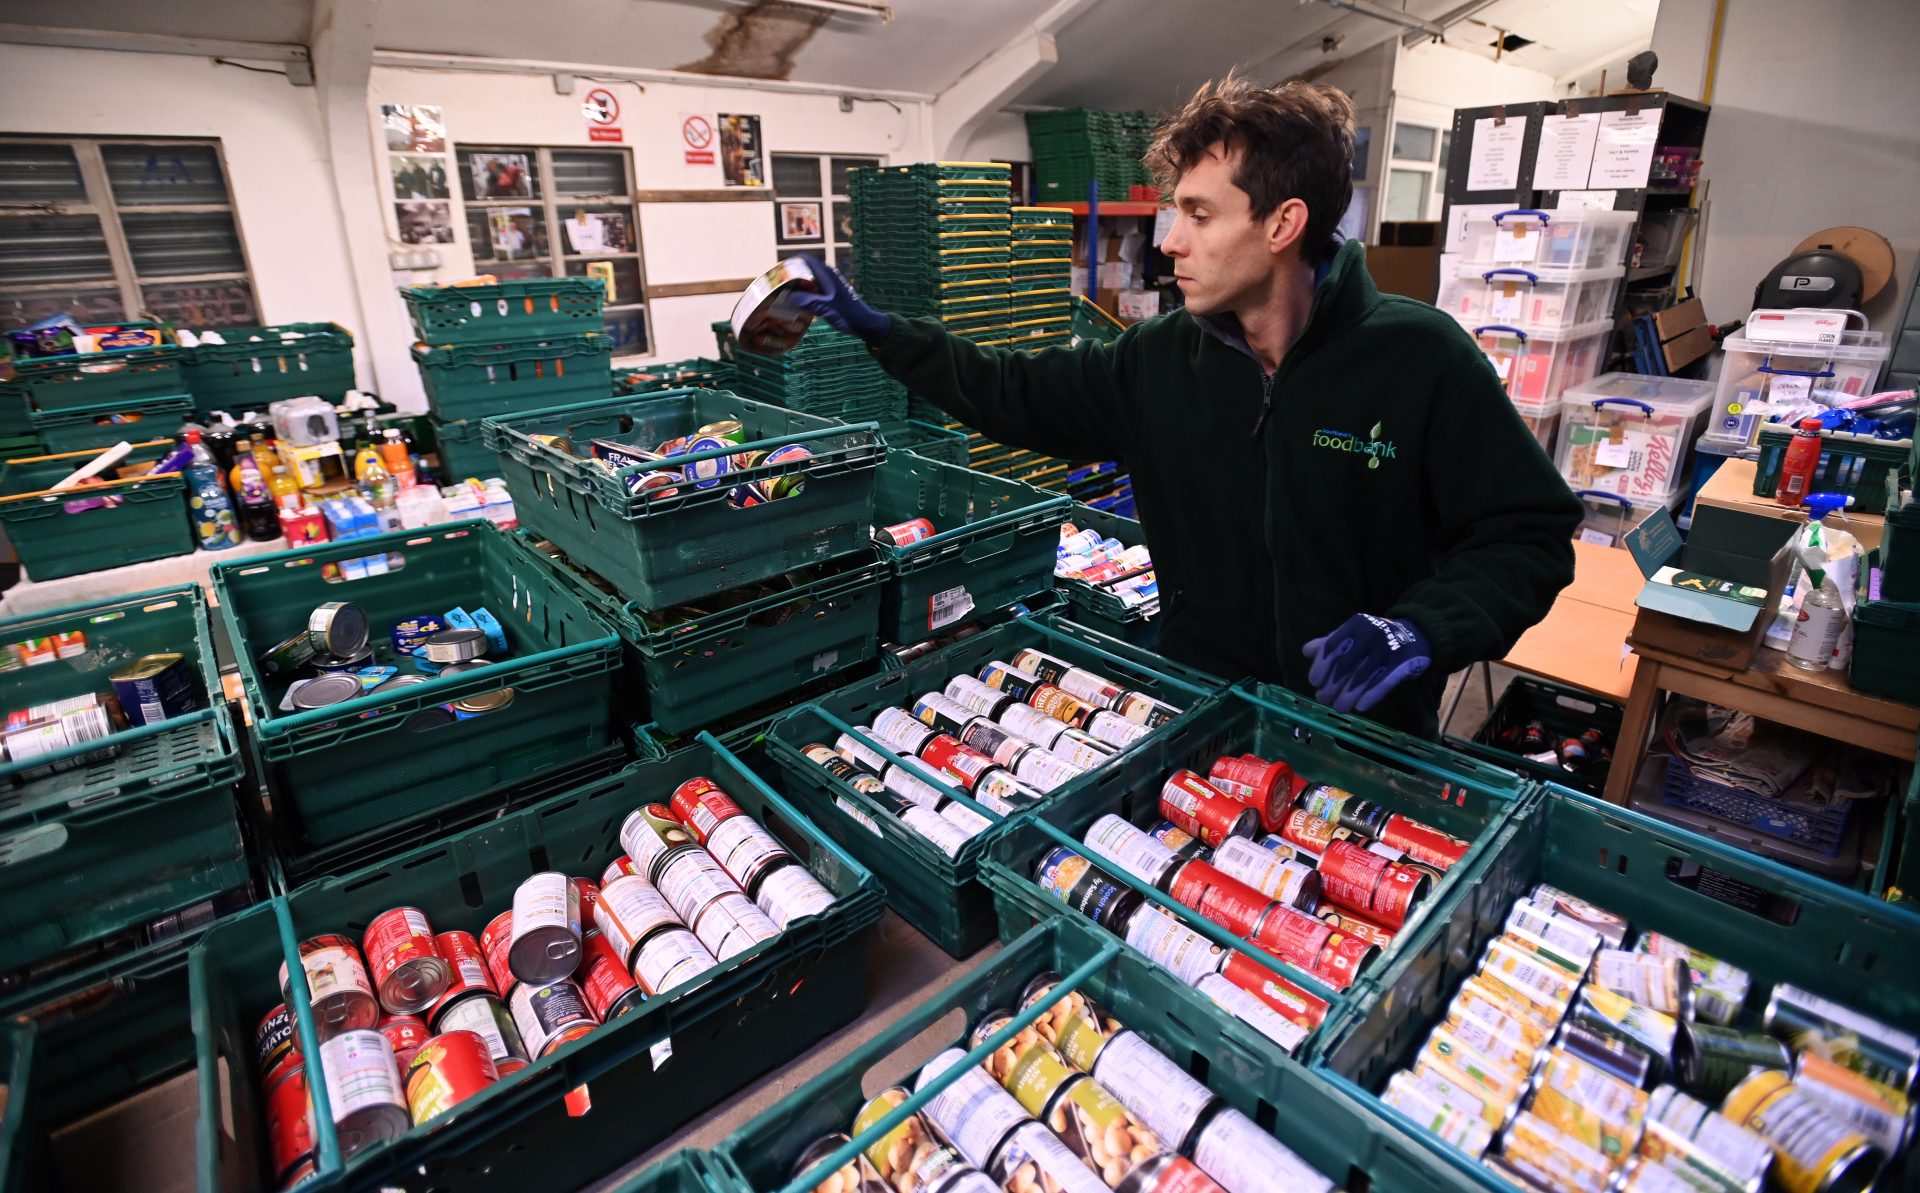 London (United Kingdom), 08/12/2021.- Guy Stevenson, from Pecan food bank in Peckham prepares emergency food parcels in London, Britain, 08 December 2021. Food banks are braced for a big rise in demand in the run up to Christmas as energy price hikes and universal credit cuts combine to leave people with less cash for food. Foodbanks have become an essential front-line service in the fight against Coronavirus, while new community stores known as the 'Pantry' are sprouting up across the UK. 'Food banks will not be sustainable in the long term' says Guy Stevenson, from Pecan Food bank. 'We see the 'Pantry' as the new way forward in helping people in a dignified way', says Stevenson. The Pantry in Peckham looks like a traditional supermarket. Customers can walk in off the street, register and pay just five euros for over ten items of food. The store receives its food from FareShare, a charity network aimed at relieving food poverty and reducing food waste in the UK. Five euros at the Pantry will buy you bread, milk, eggs, meat, fruit, vegetables and much more. (Reino Unido, Londres) EFE/EPA/ANDY RAIN